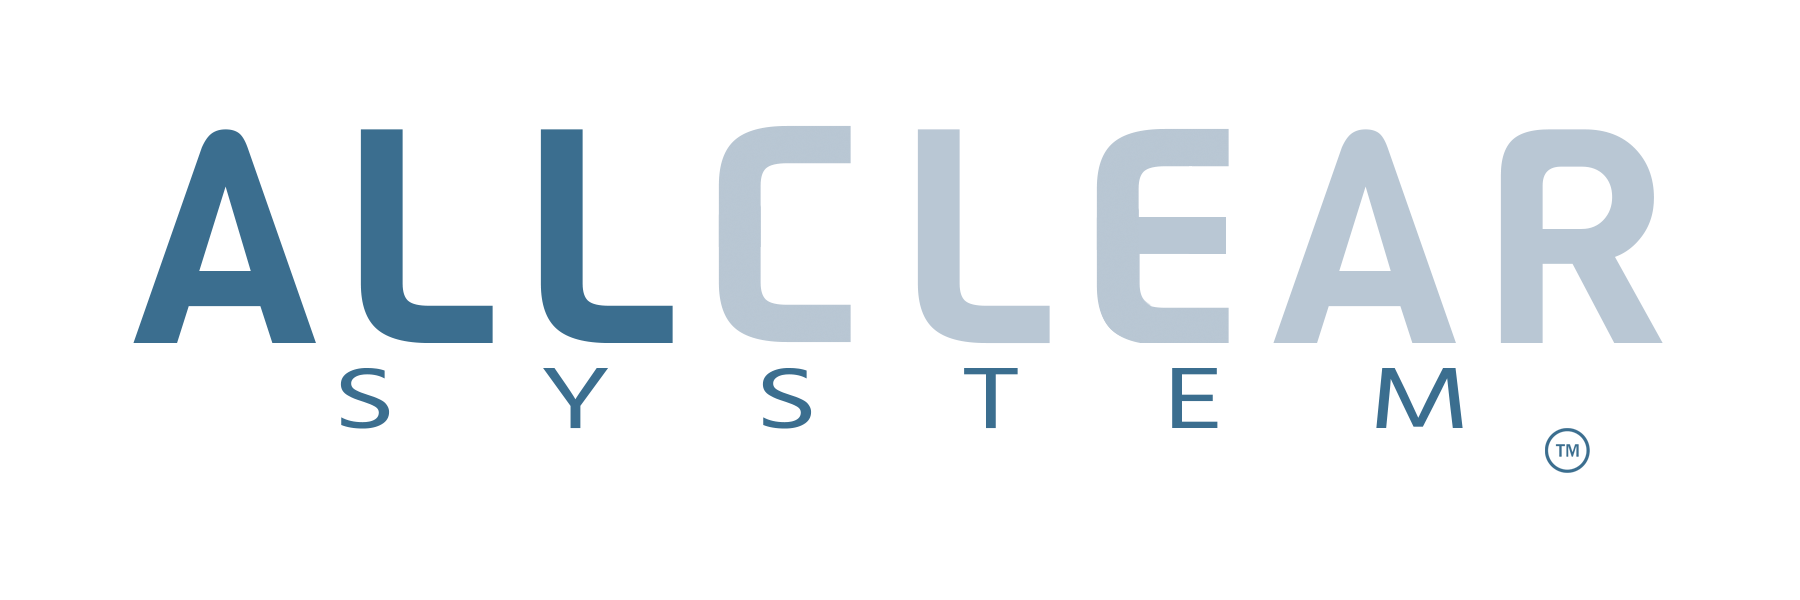 AllClearLogo_PNG